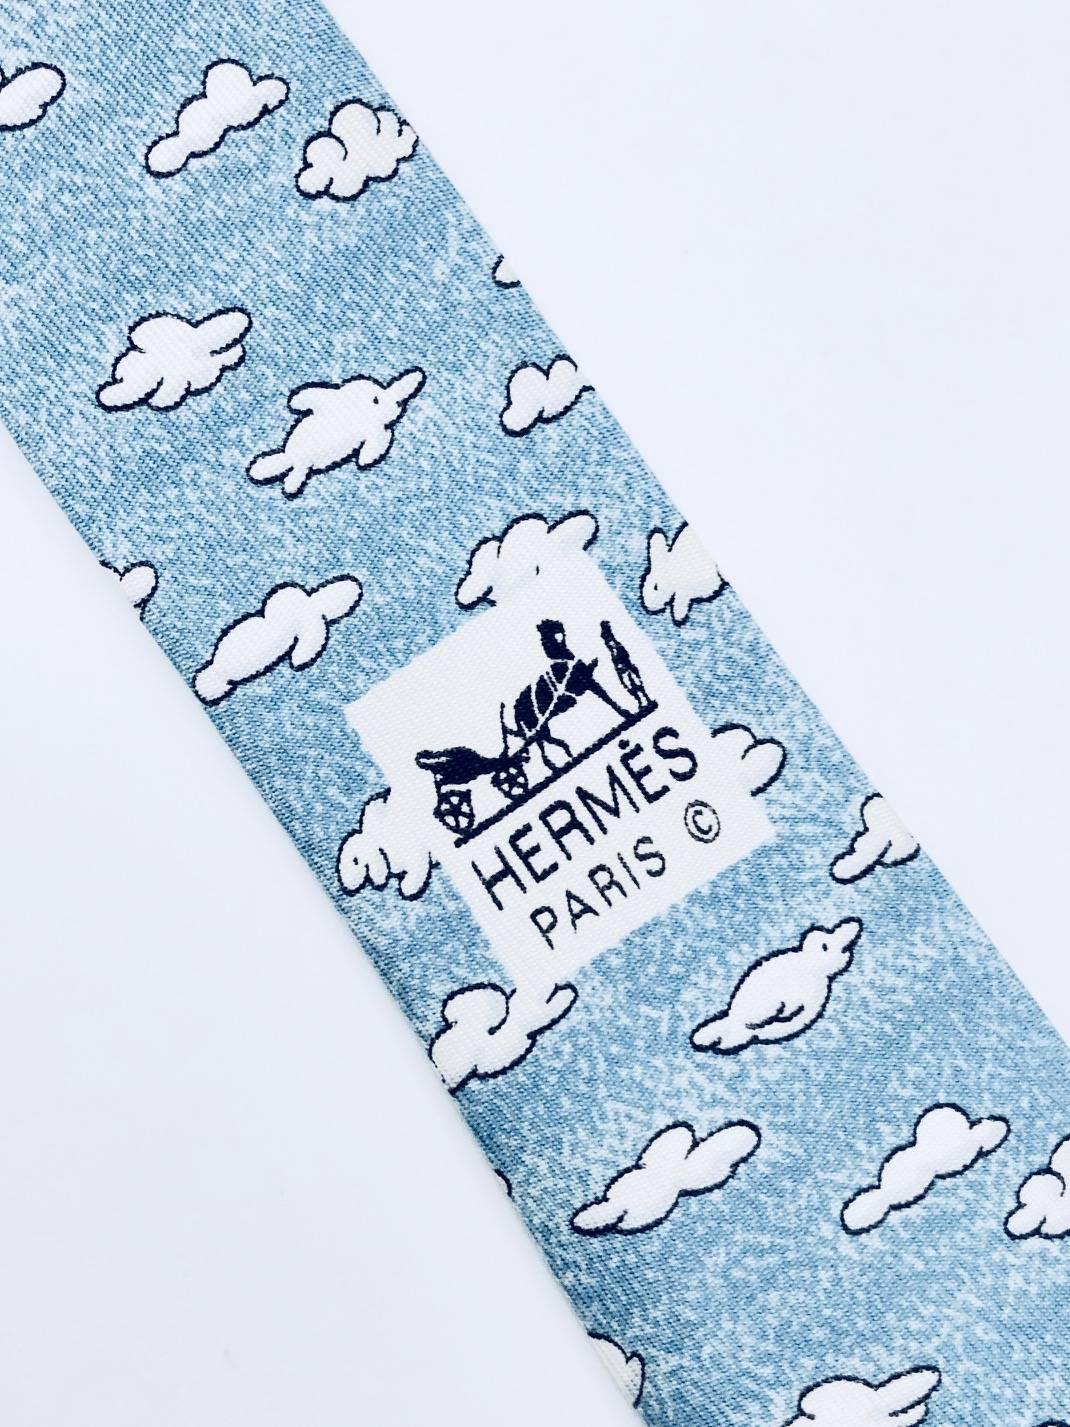 How delightful, heavenly Hermes silk tie with clouds floating across a blue  sky, look closely for the clouds shaped as dolphin, sheep and ducks, so dreamy!  Length 56 inches, width 3.75 inches.